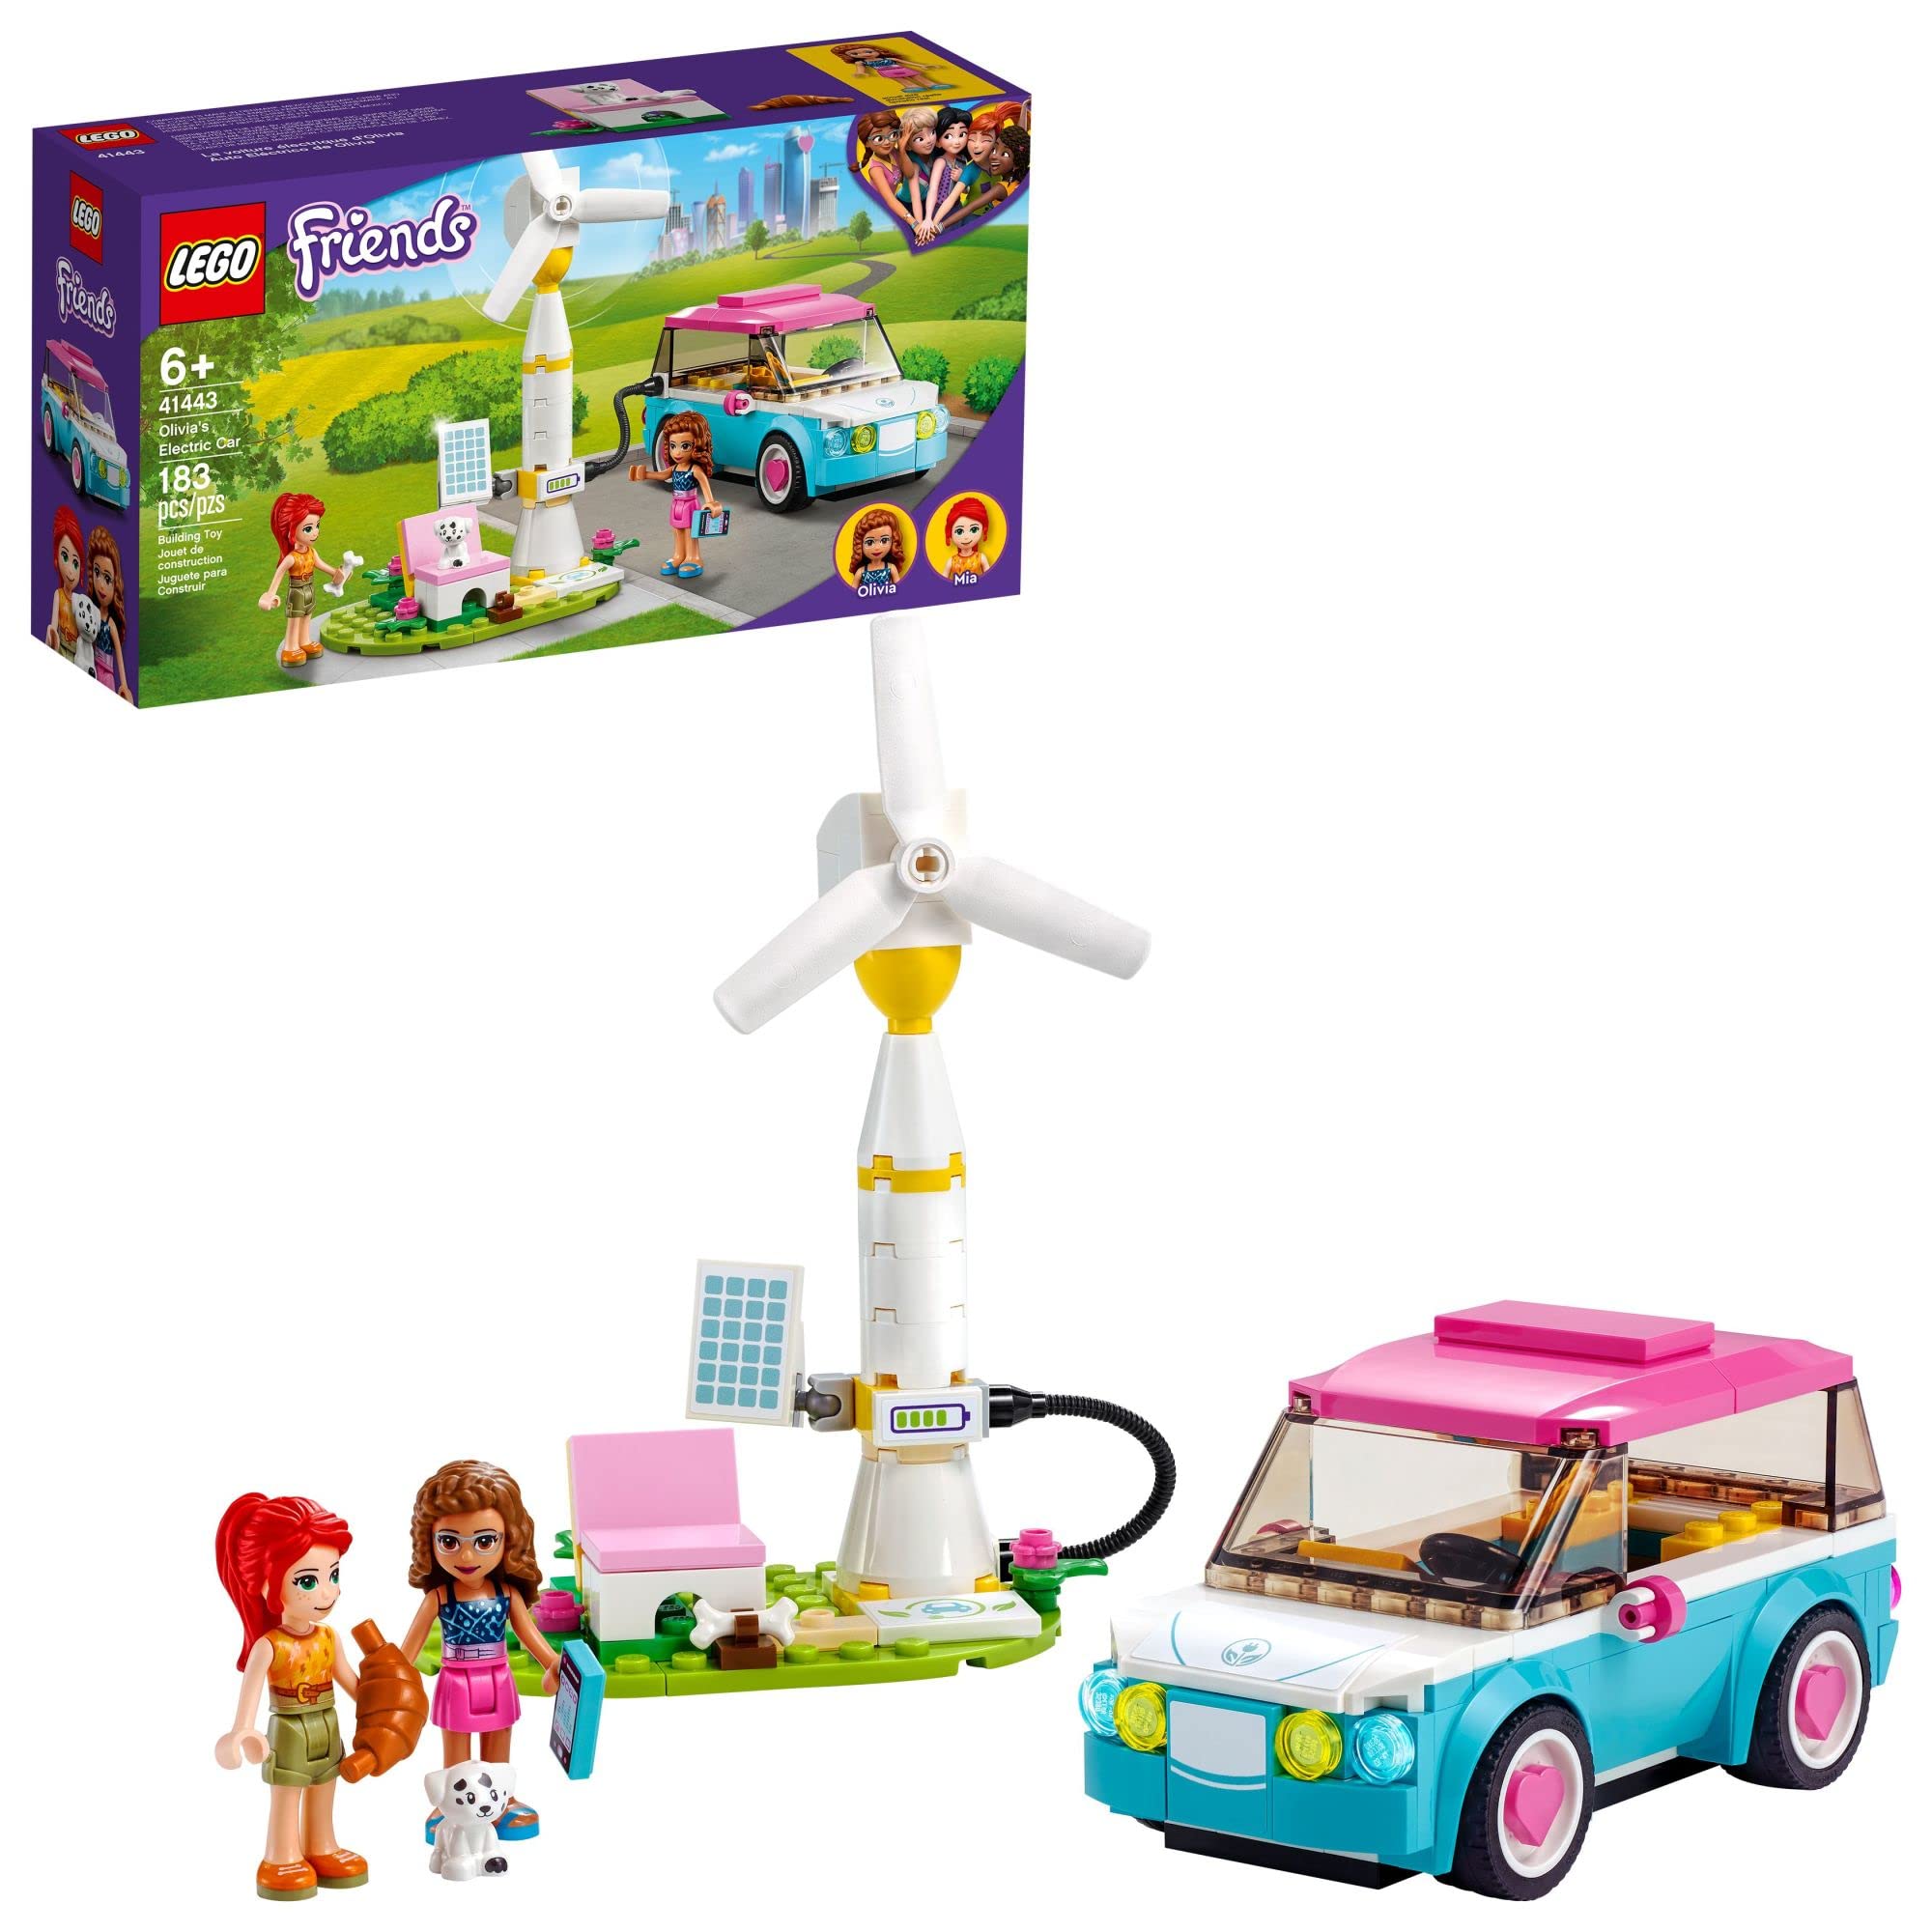 183-Piece LEGO Friends Olivia's Electric Car Toy $8.49 + Free Shipping w/ Prime or on